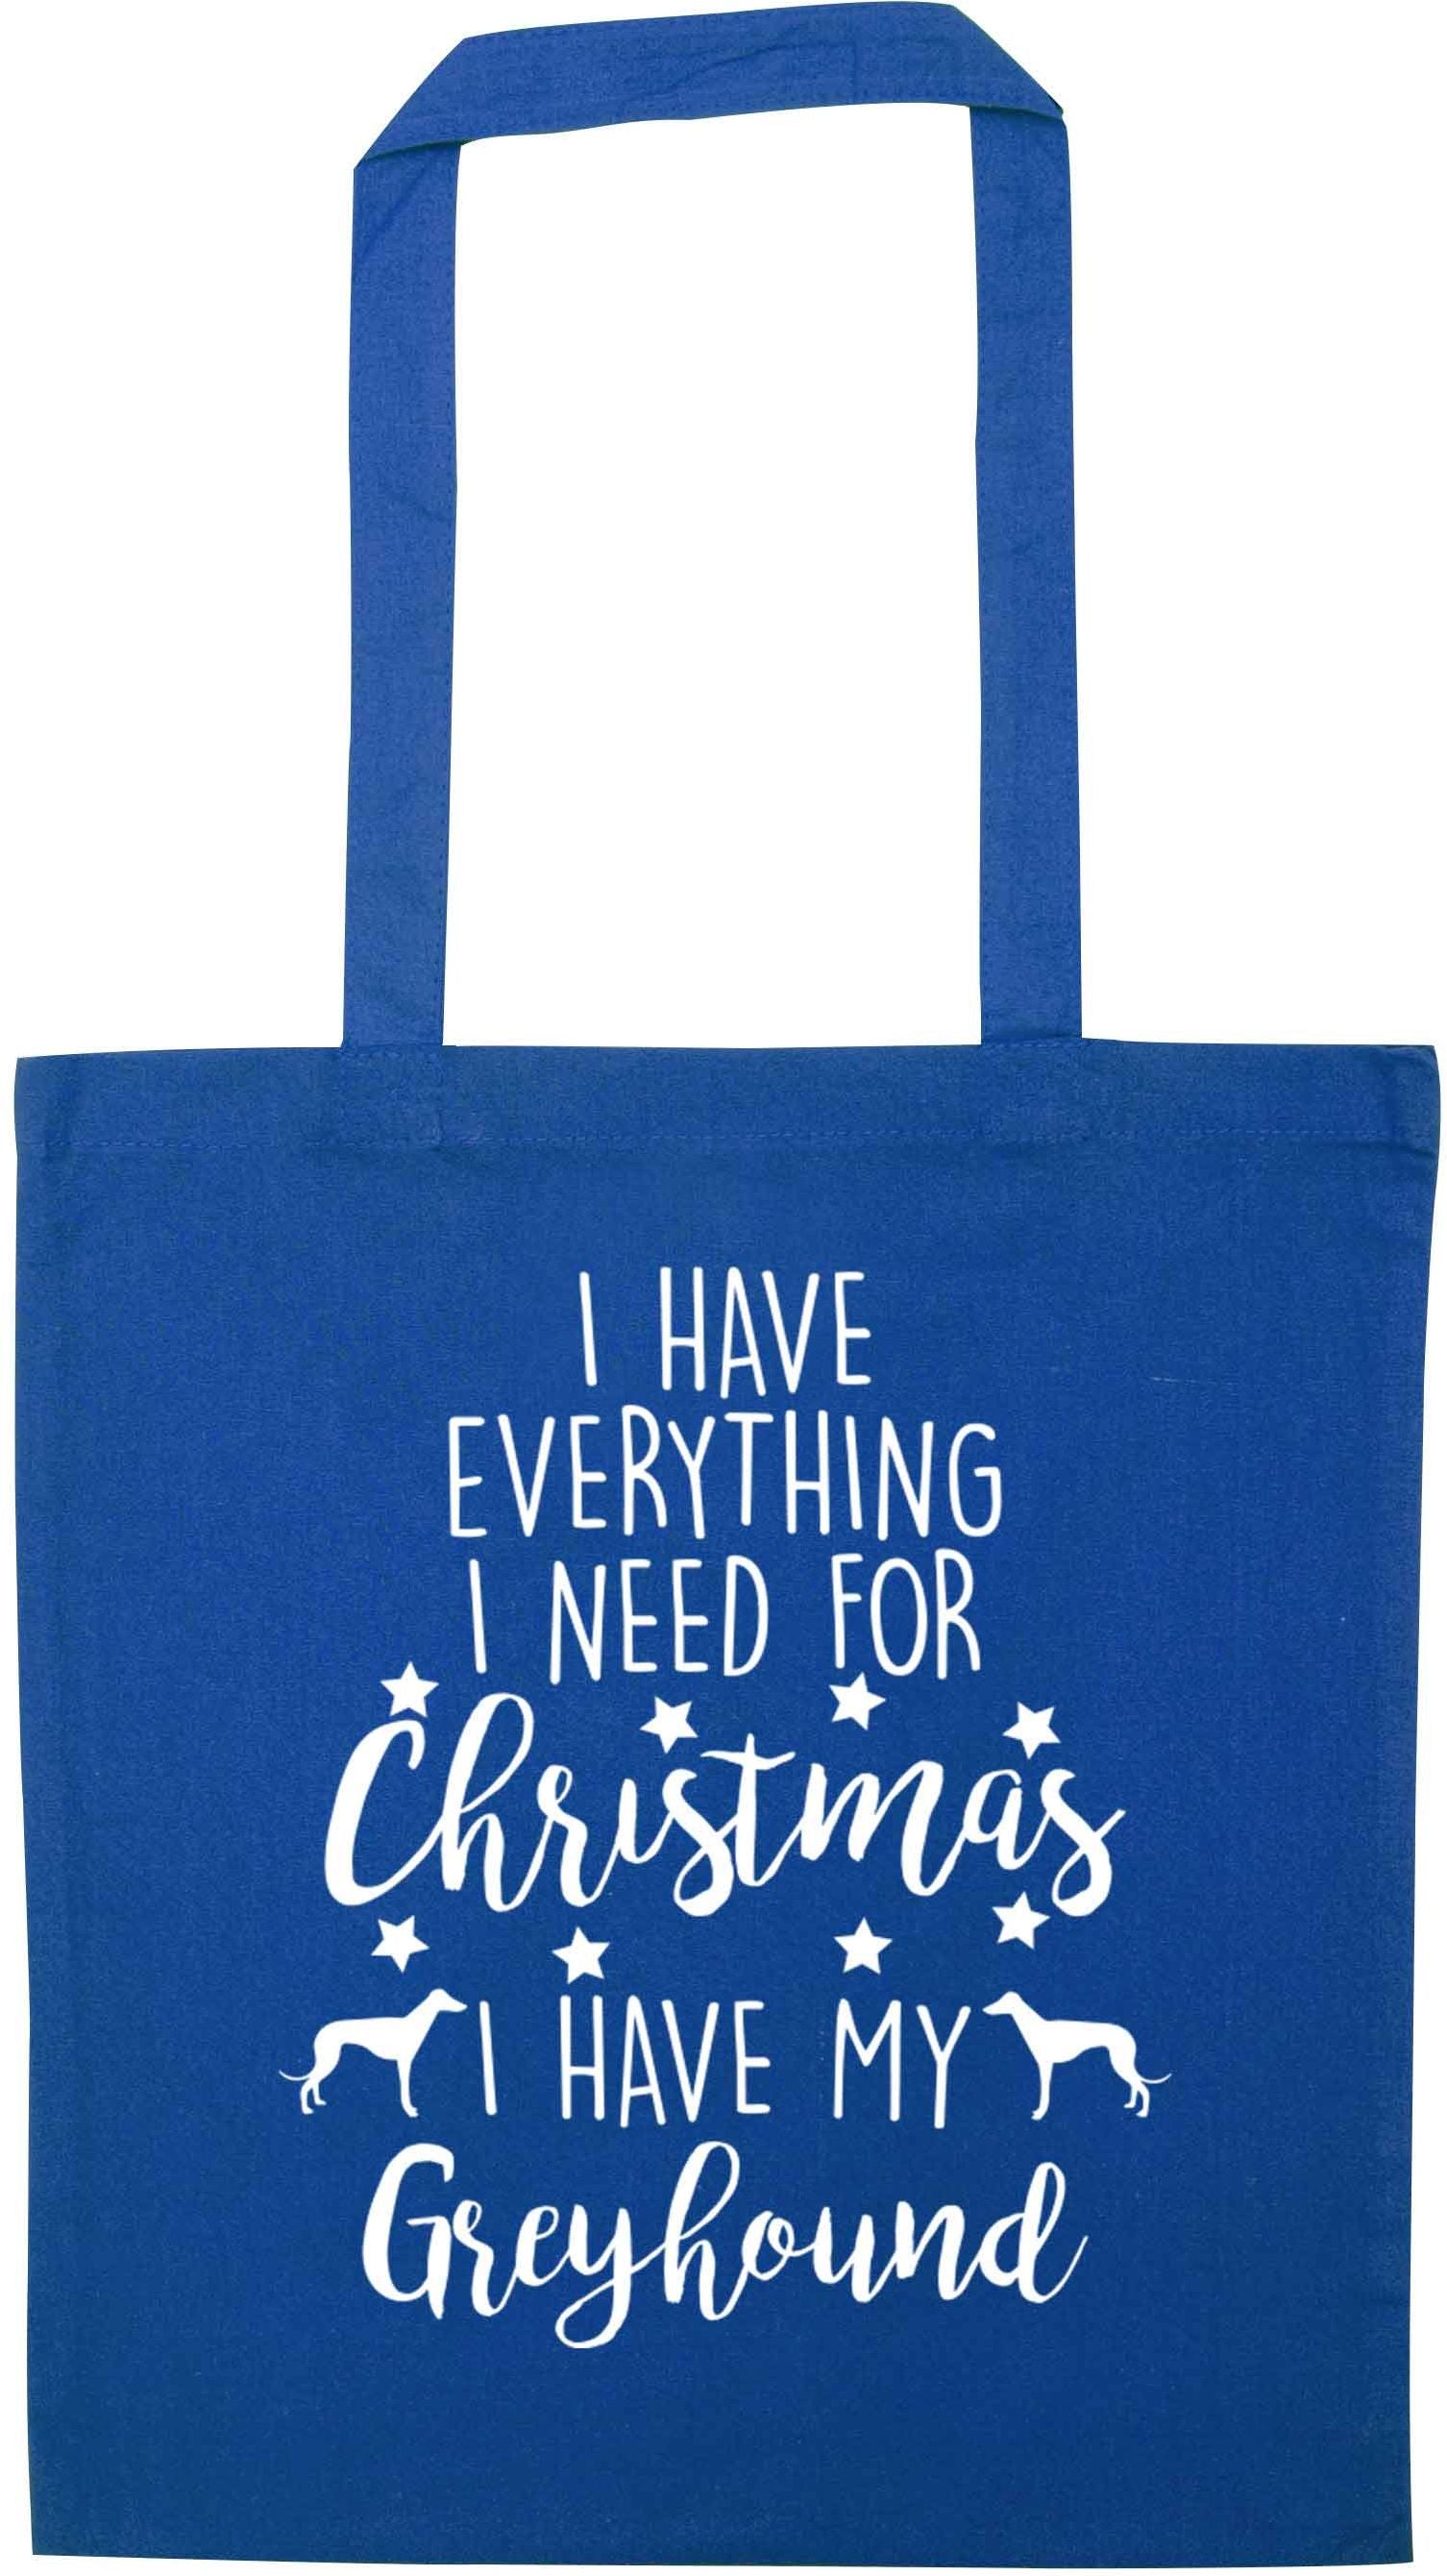 I have everything I need for Christmas I have my greyhound blue tote bag